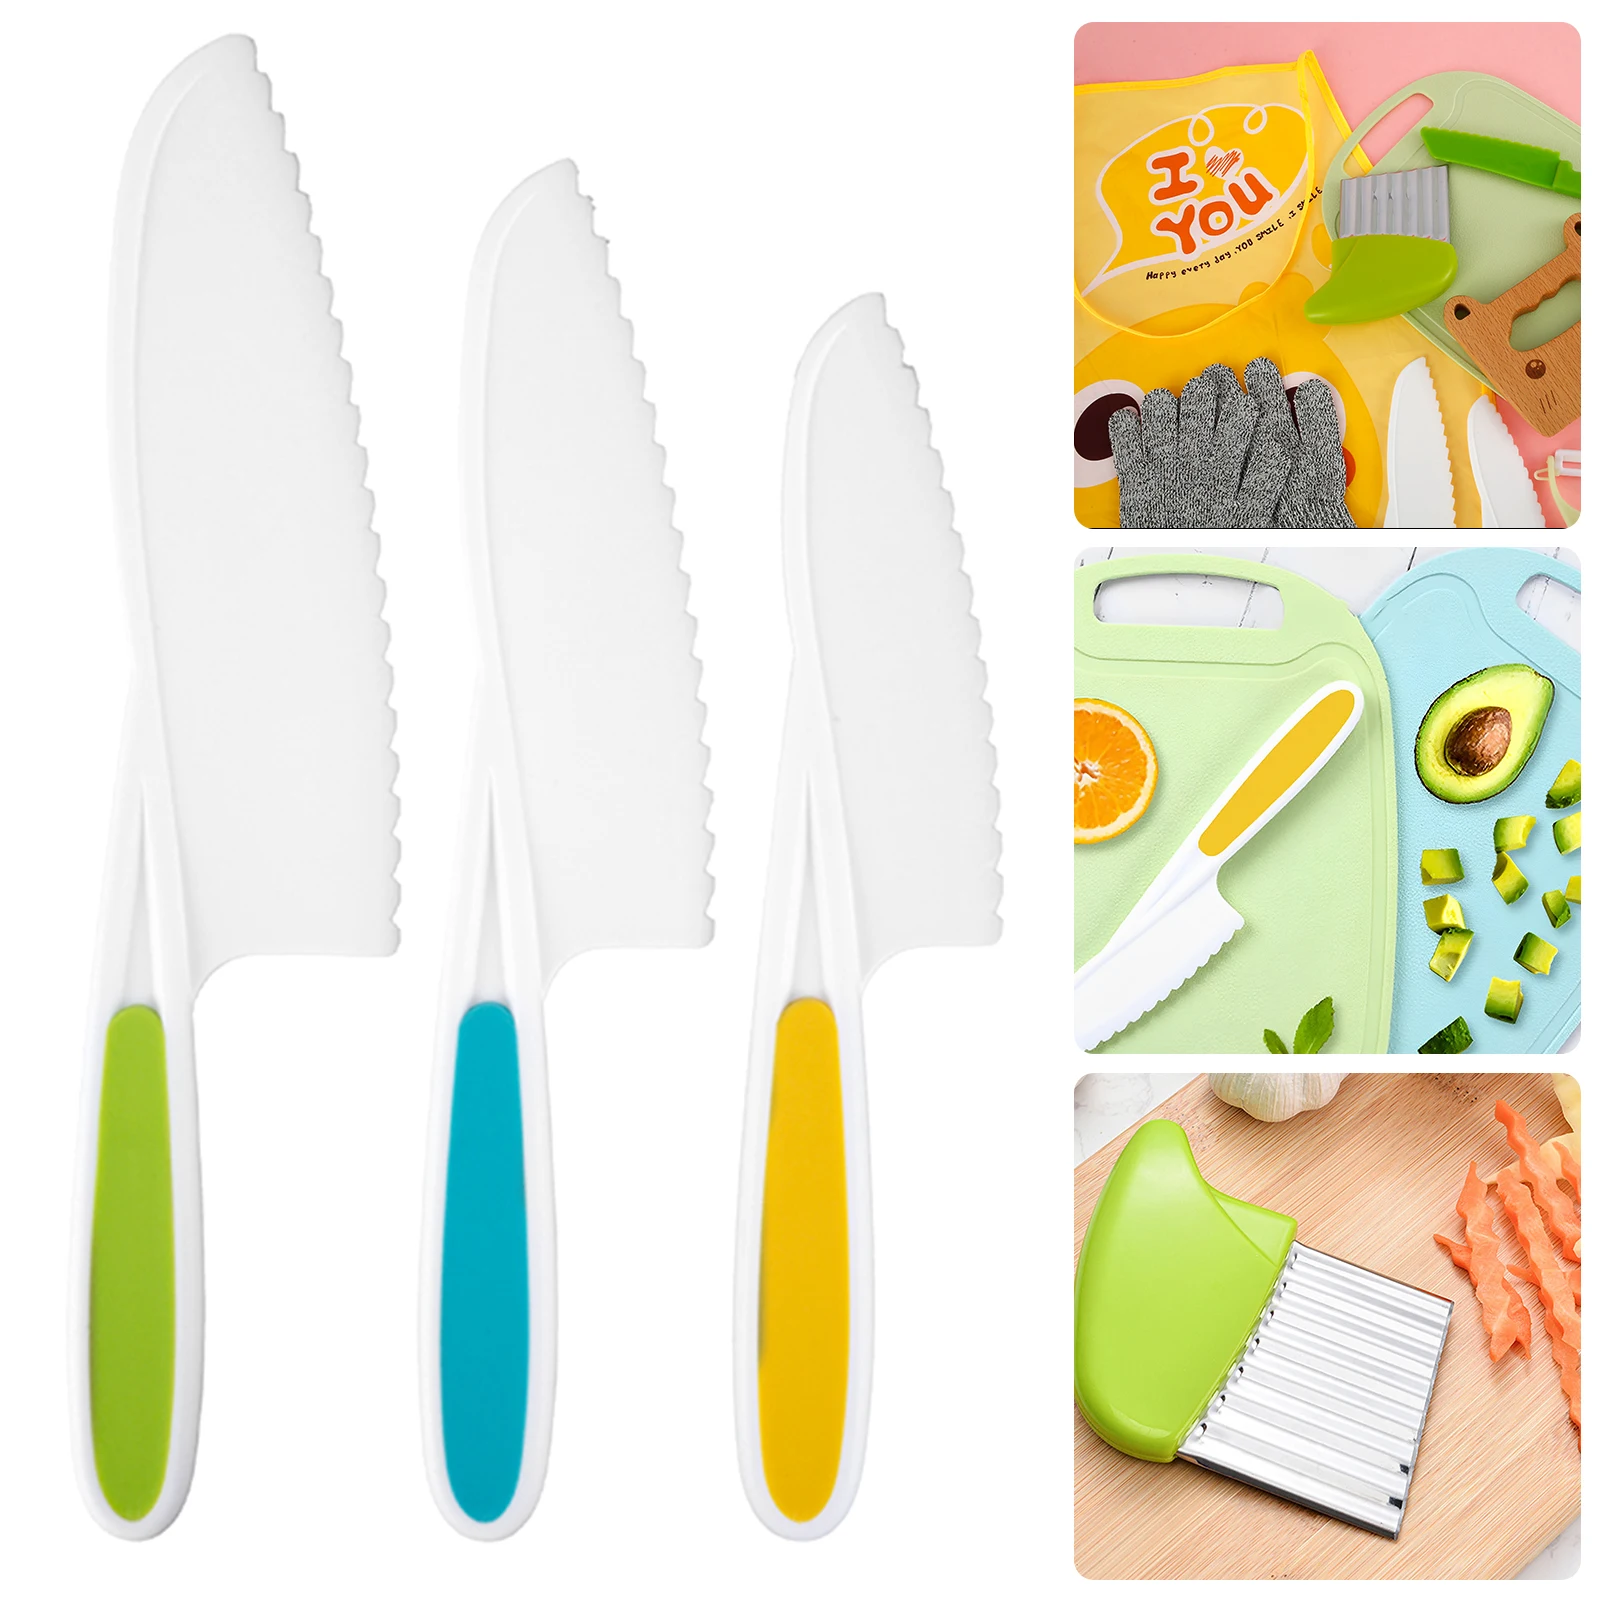 

Kids Kitchen Cutter Set Wooden Toddler Safety Cutters Reusable Plastic Cutters Set with Wood Safe Cutter Serrated Edges Plastic